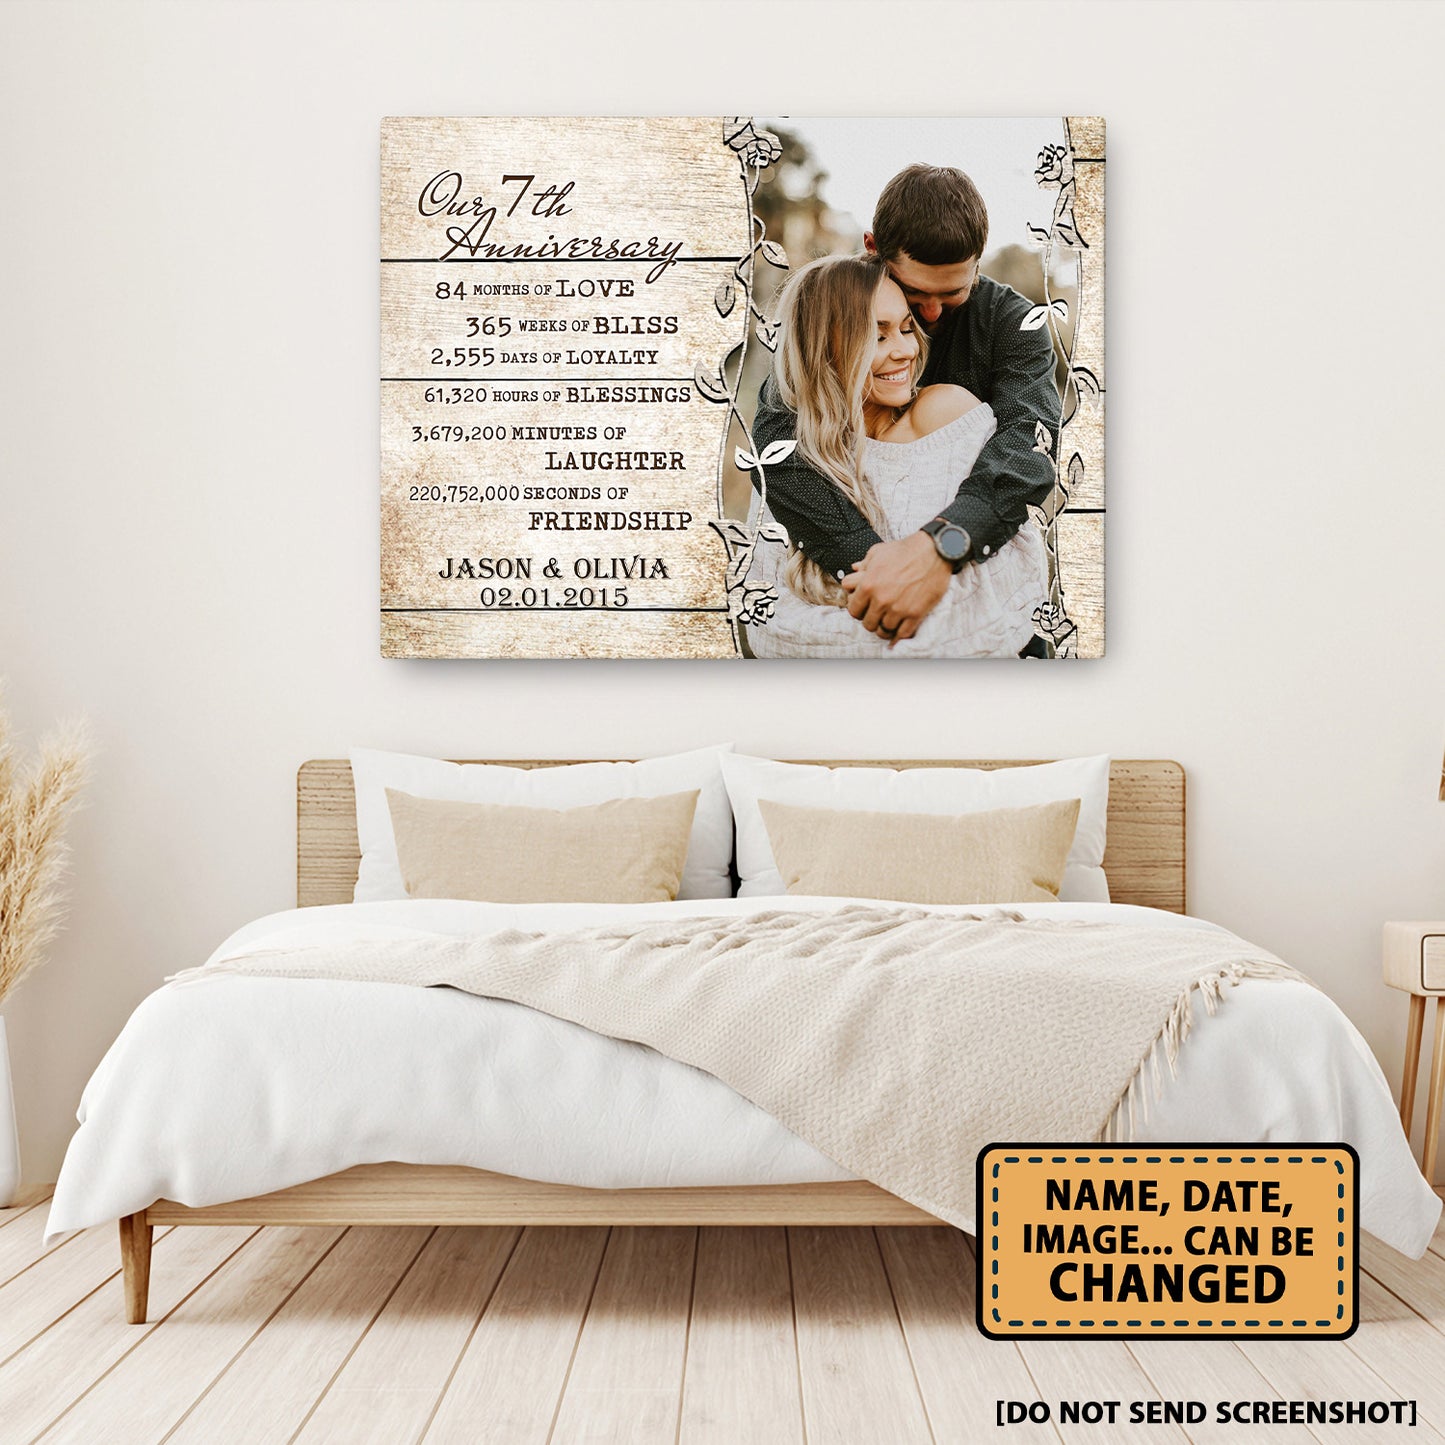 Our 7th Anniversary Custom Image Personalized Canvas Valentine Gifts